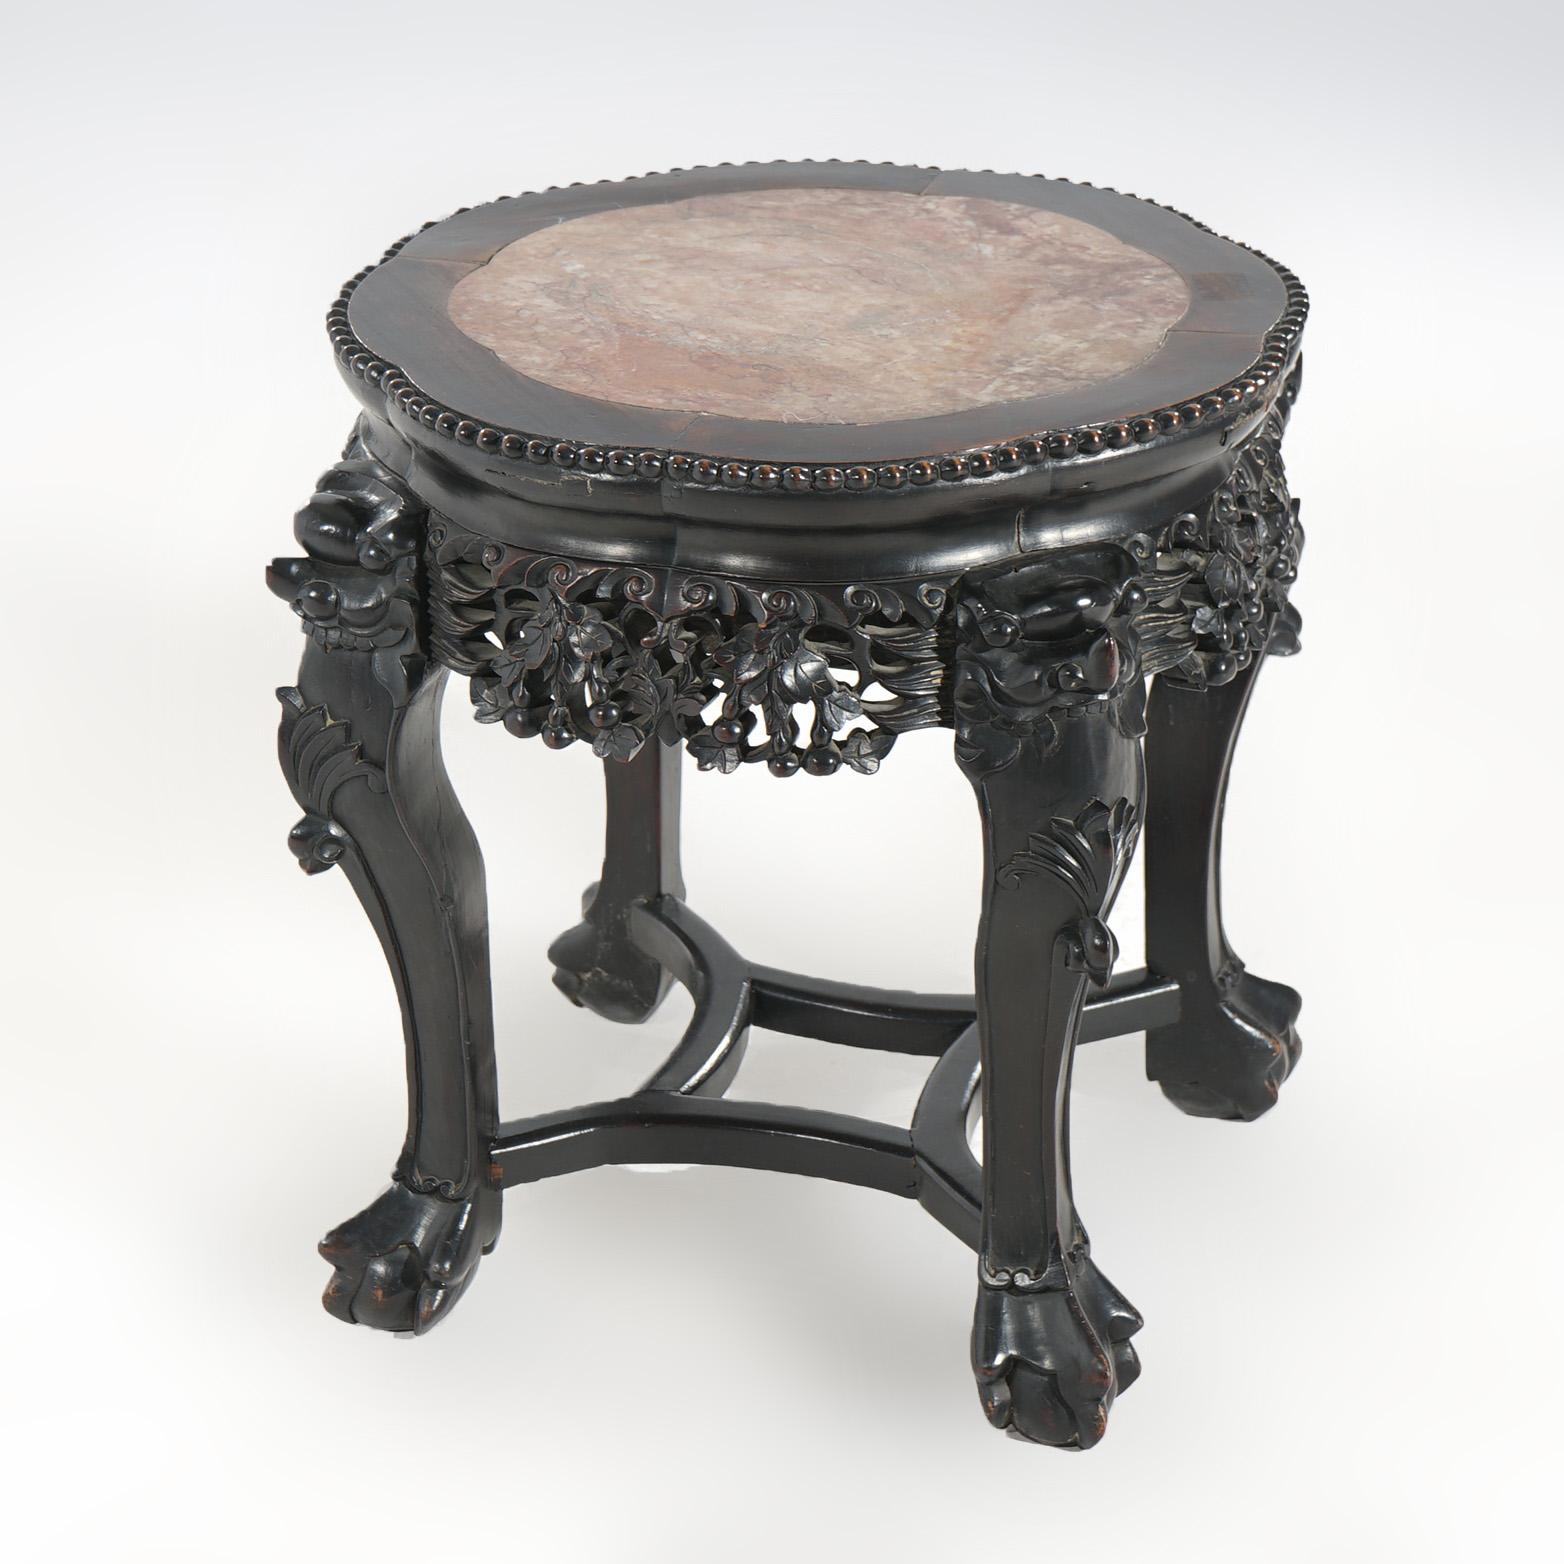 ***Ask About Reduced In-House Shipping Rates - Reliable Service & Fully Insured***
Antique Chinese Figural Carved Rosewood Table with Inset Marble Top, Lion Heads, Foliate Elements & Paw Feet, C1910

Measures - 18.25